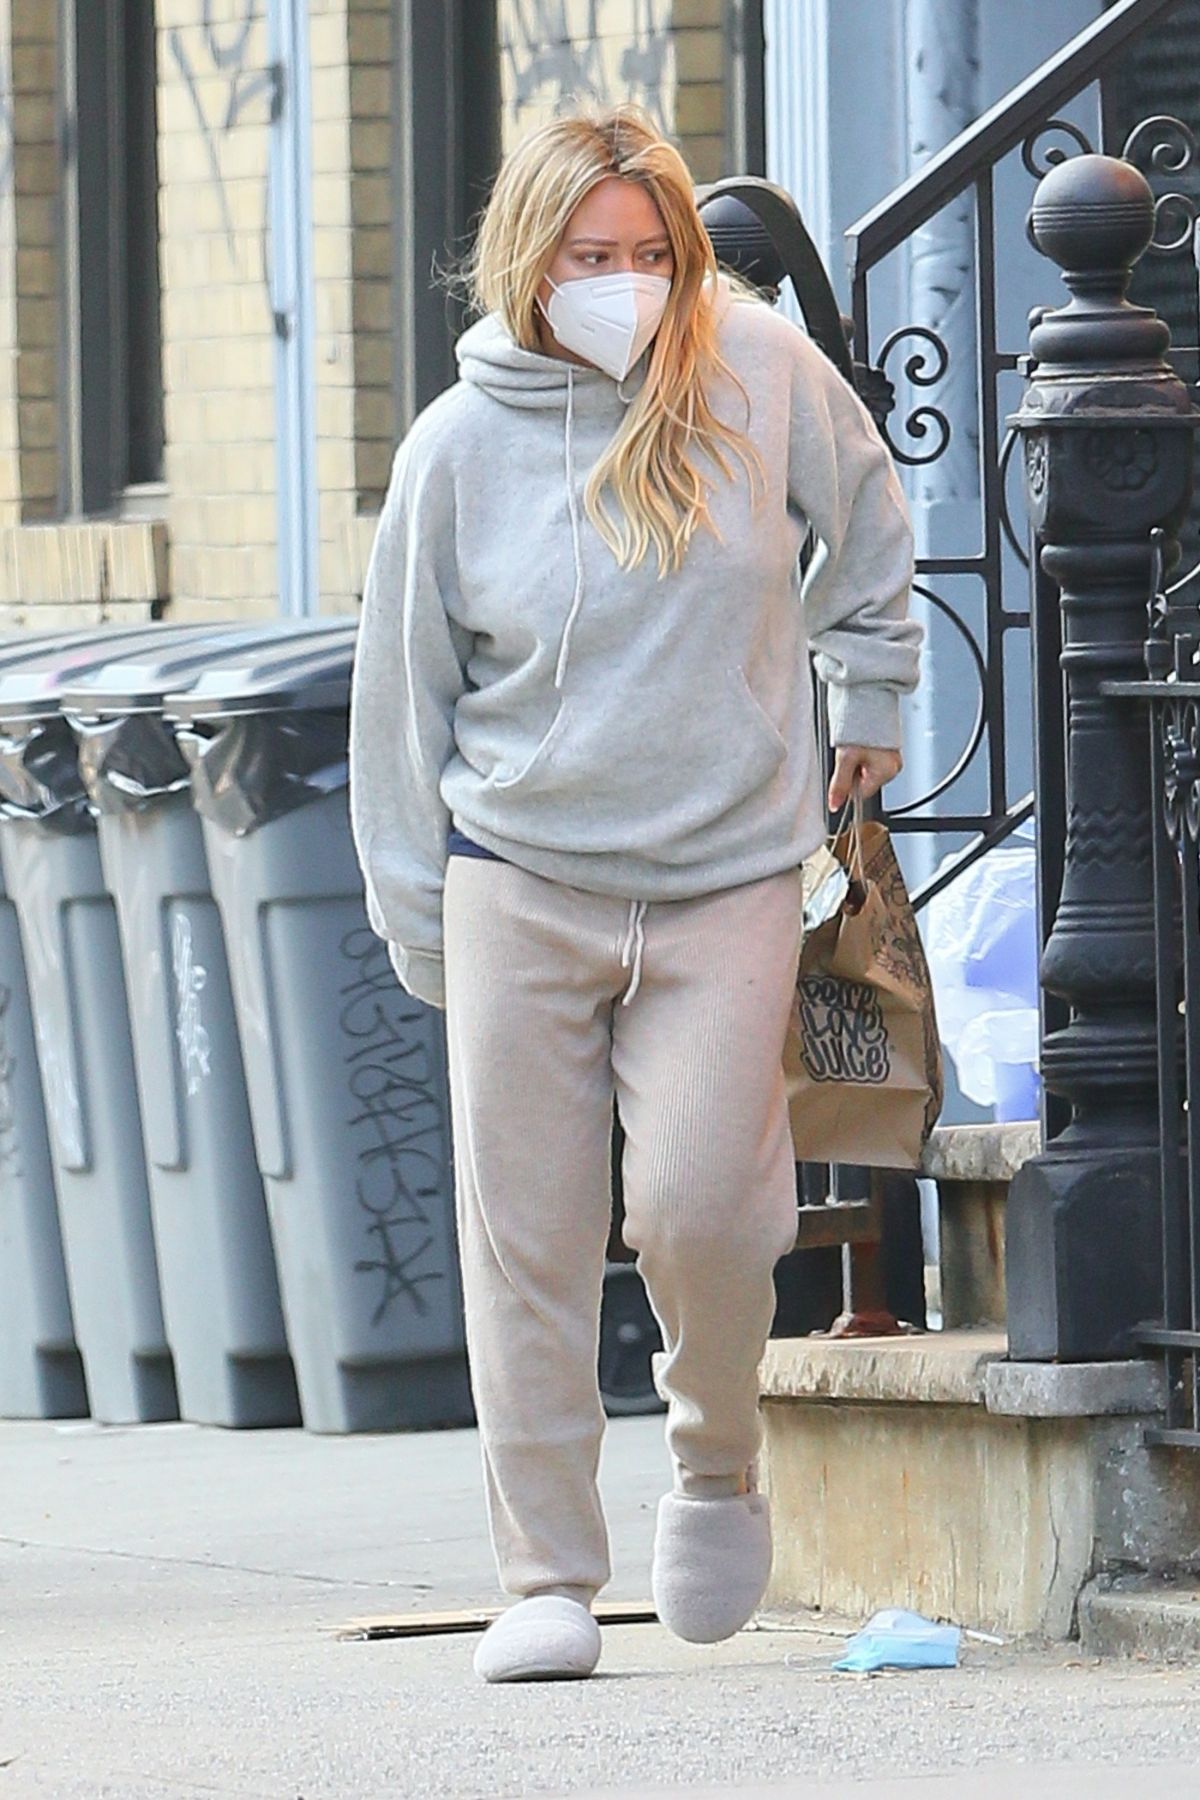 pregnant-hilary-duff-picking-up-delivered-food-in-new-york-11-21-2020-4.jpg